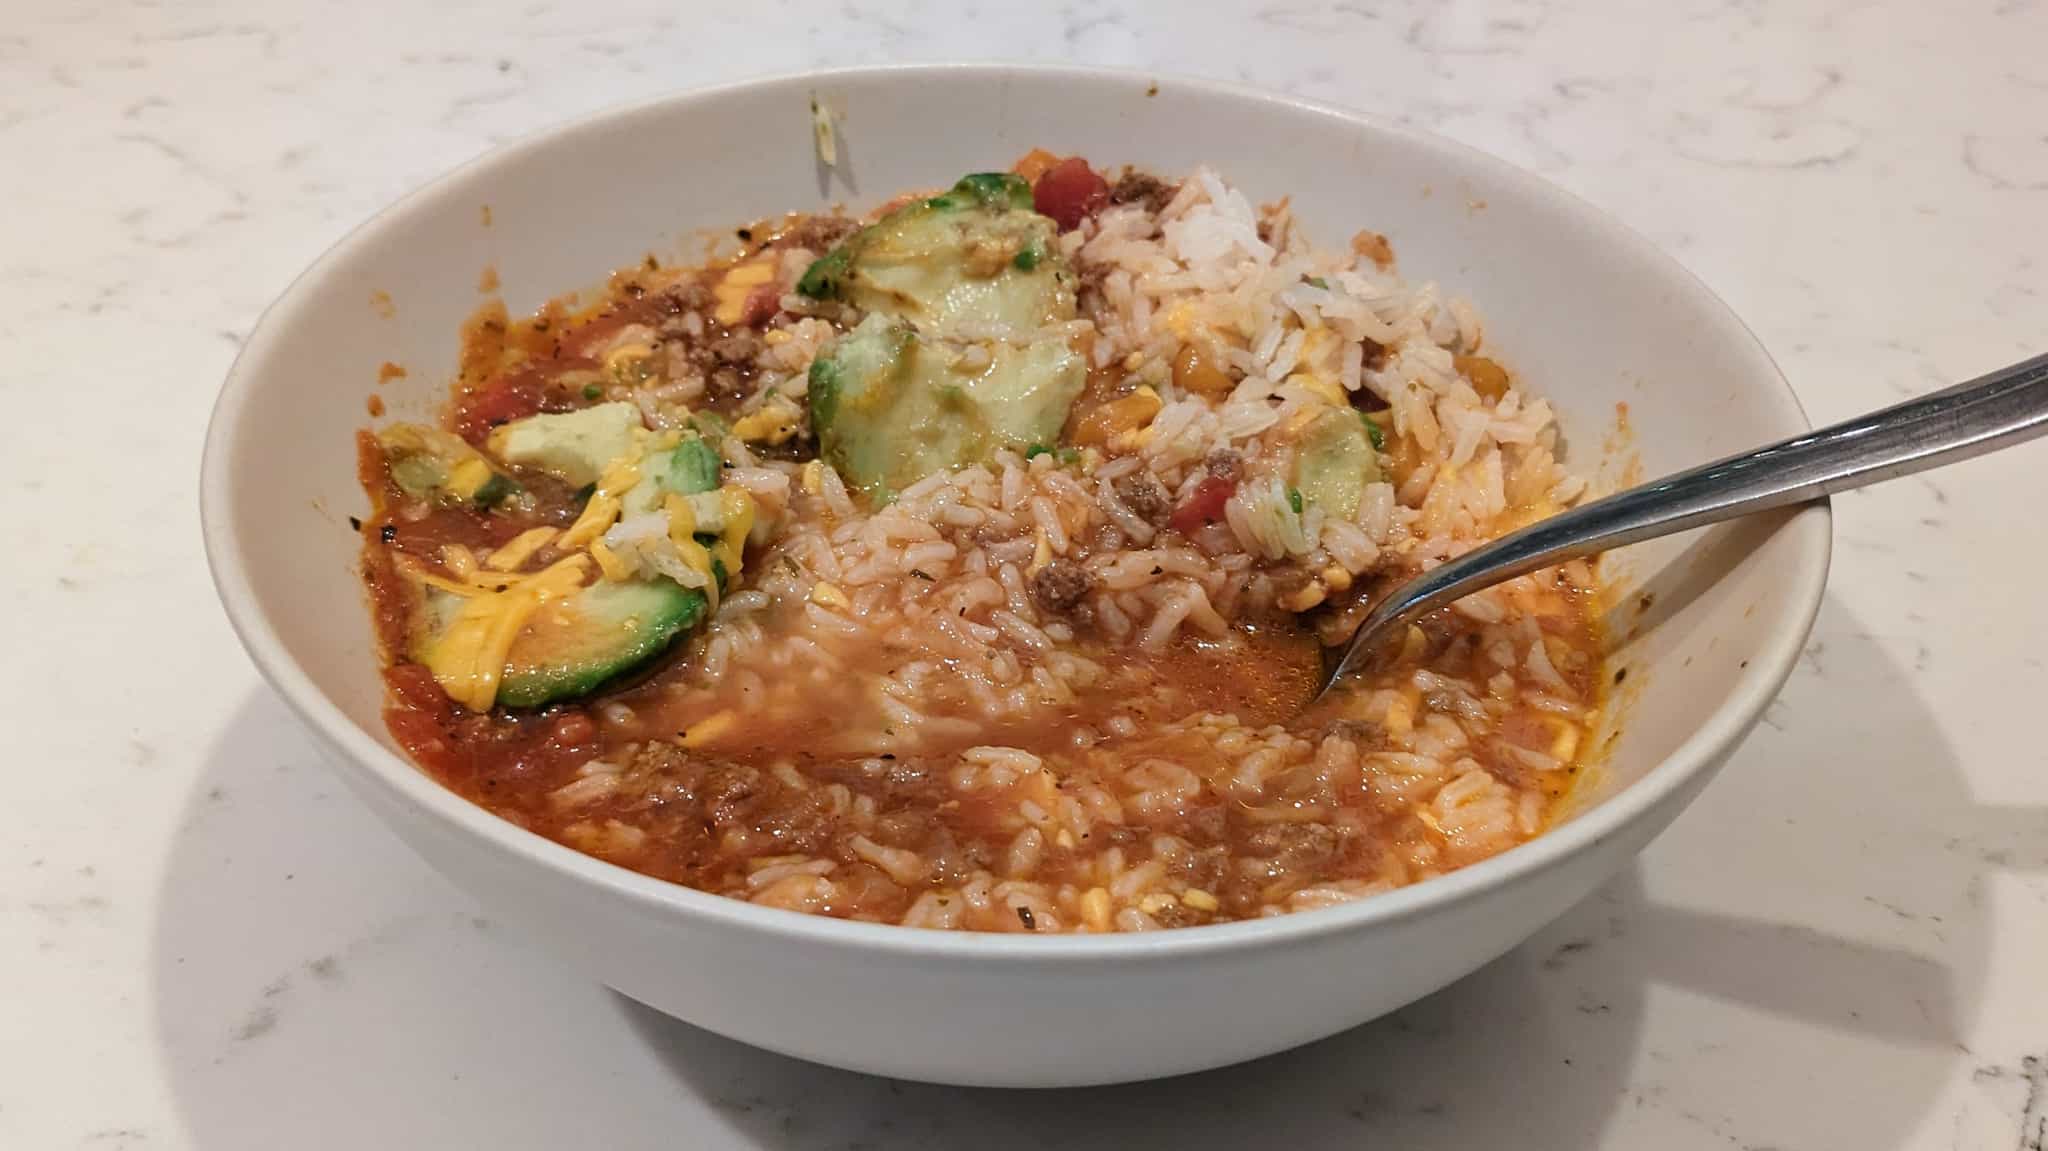 Bowl of rice, avocado slices, in a red soup.